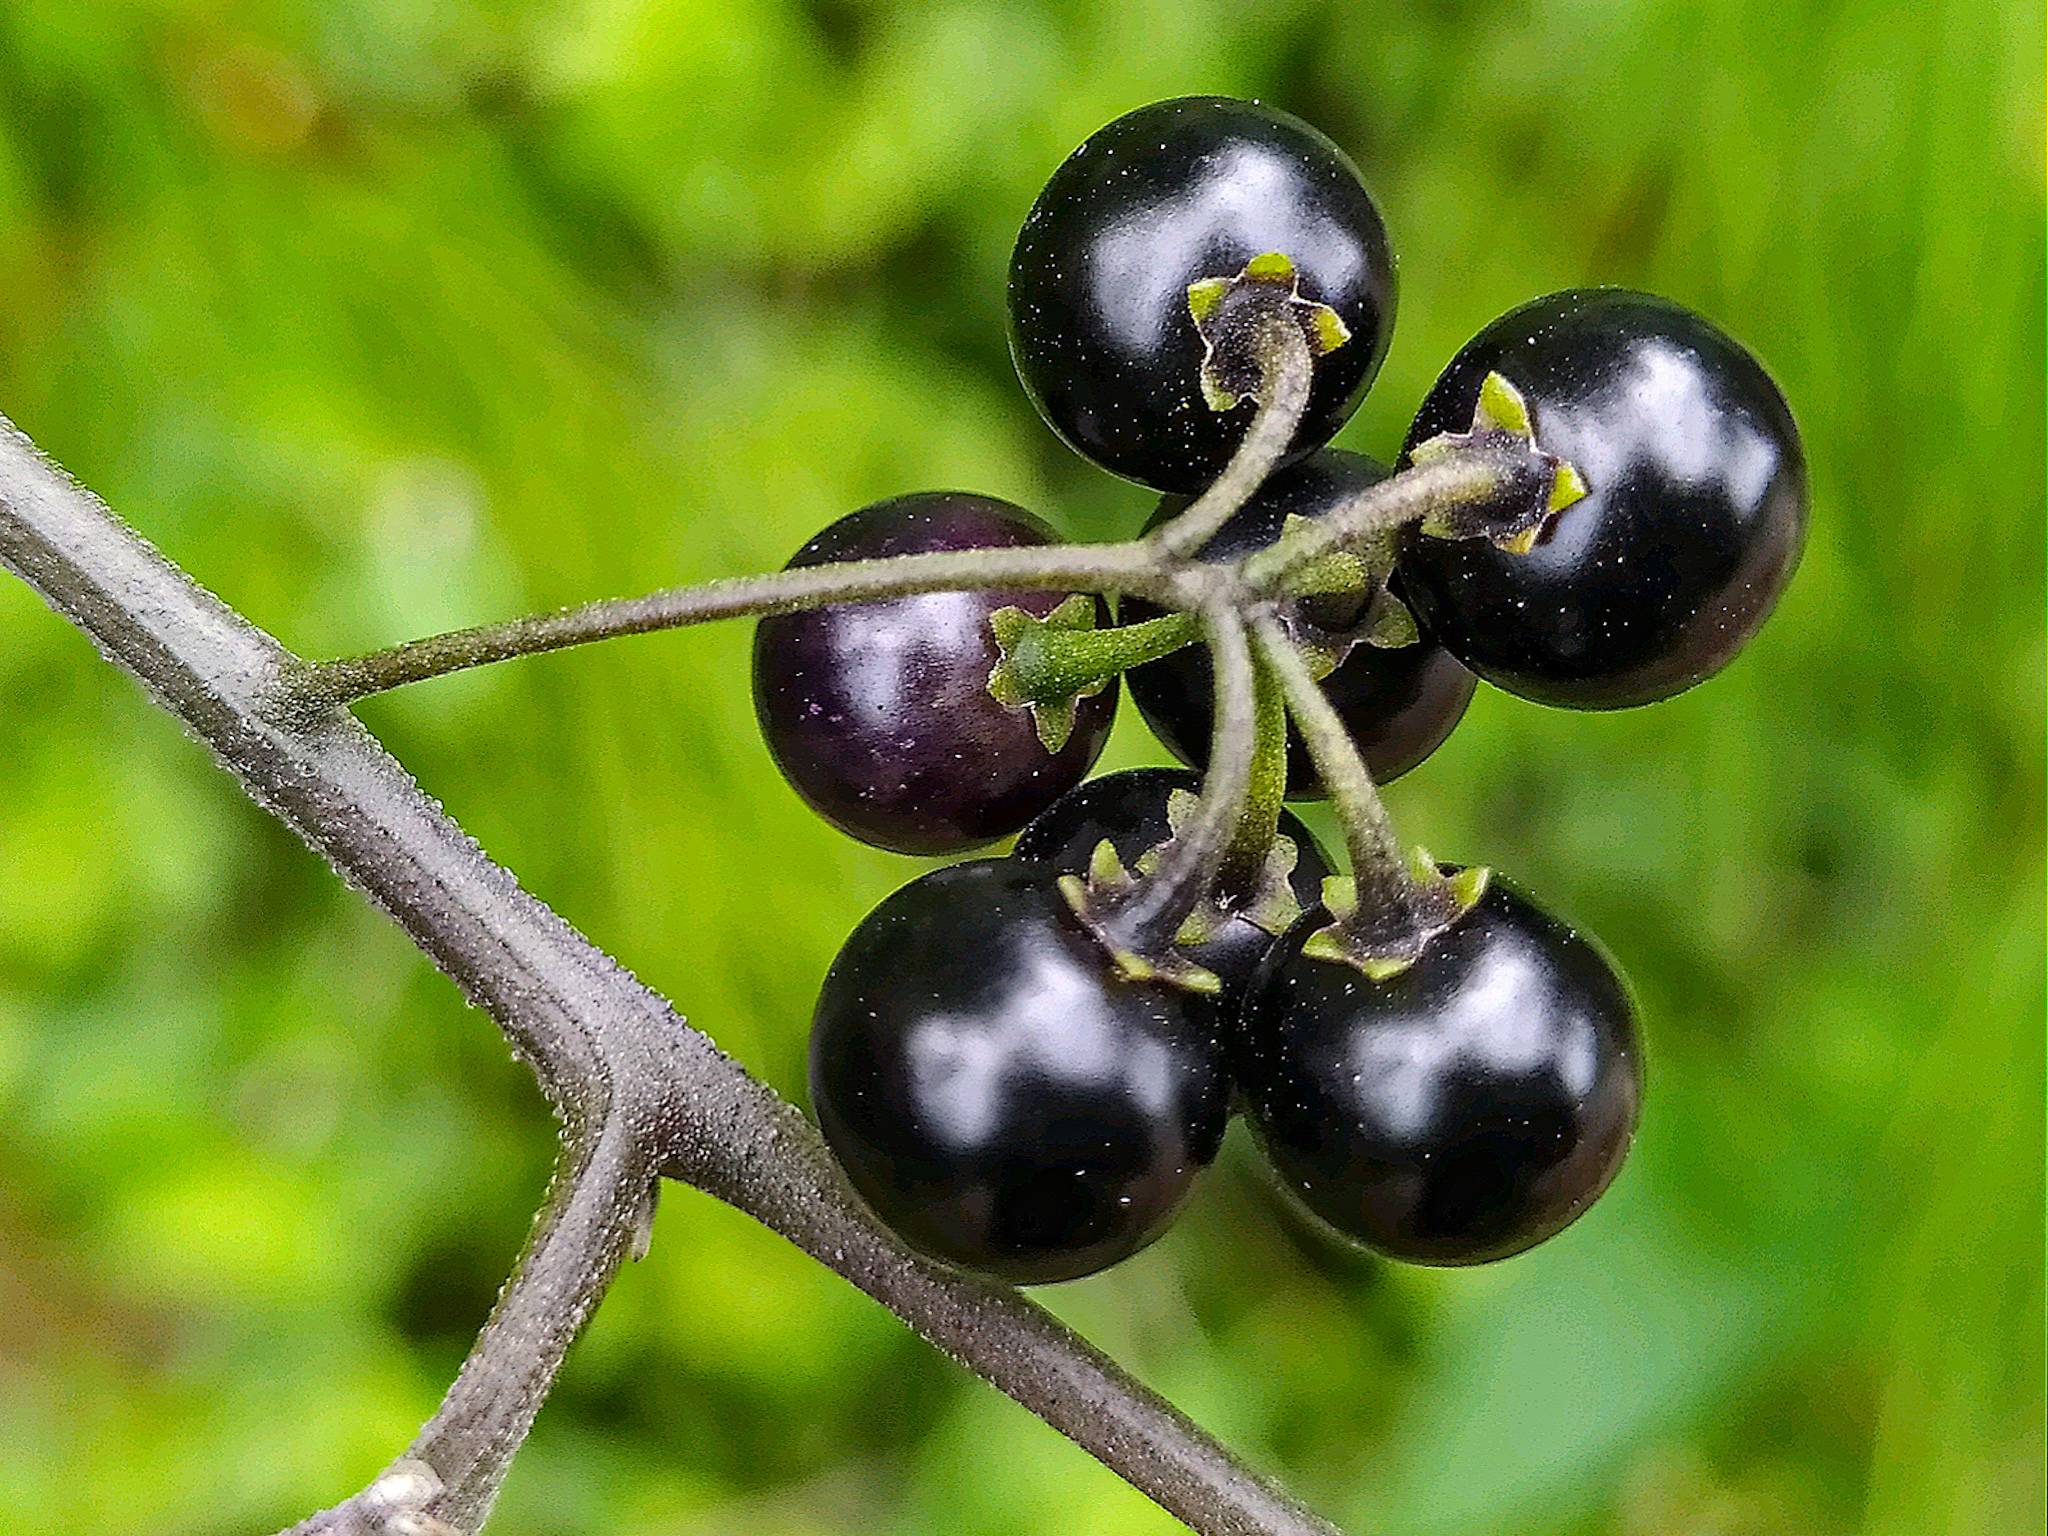 Close-up cluster of 7 shiny black berries hanging from a single stem. American Black Nightshade.